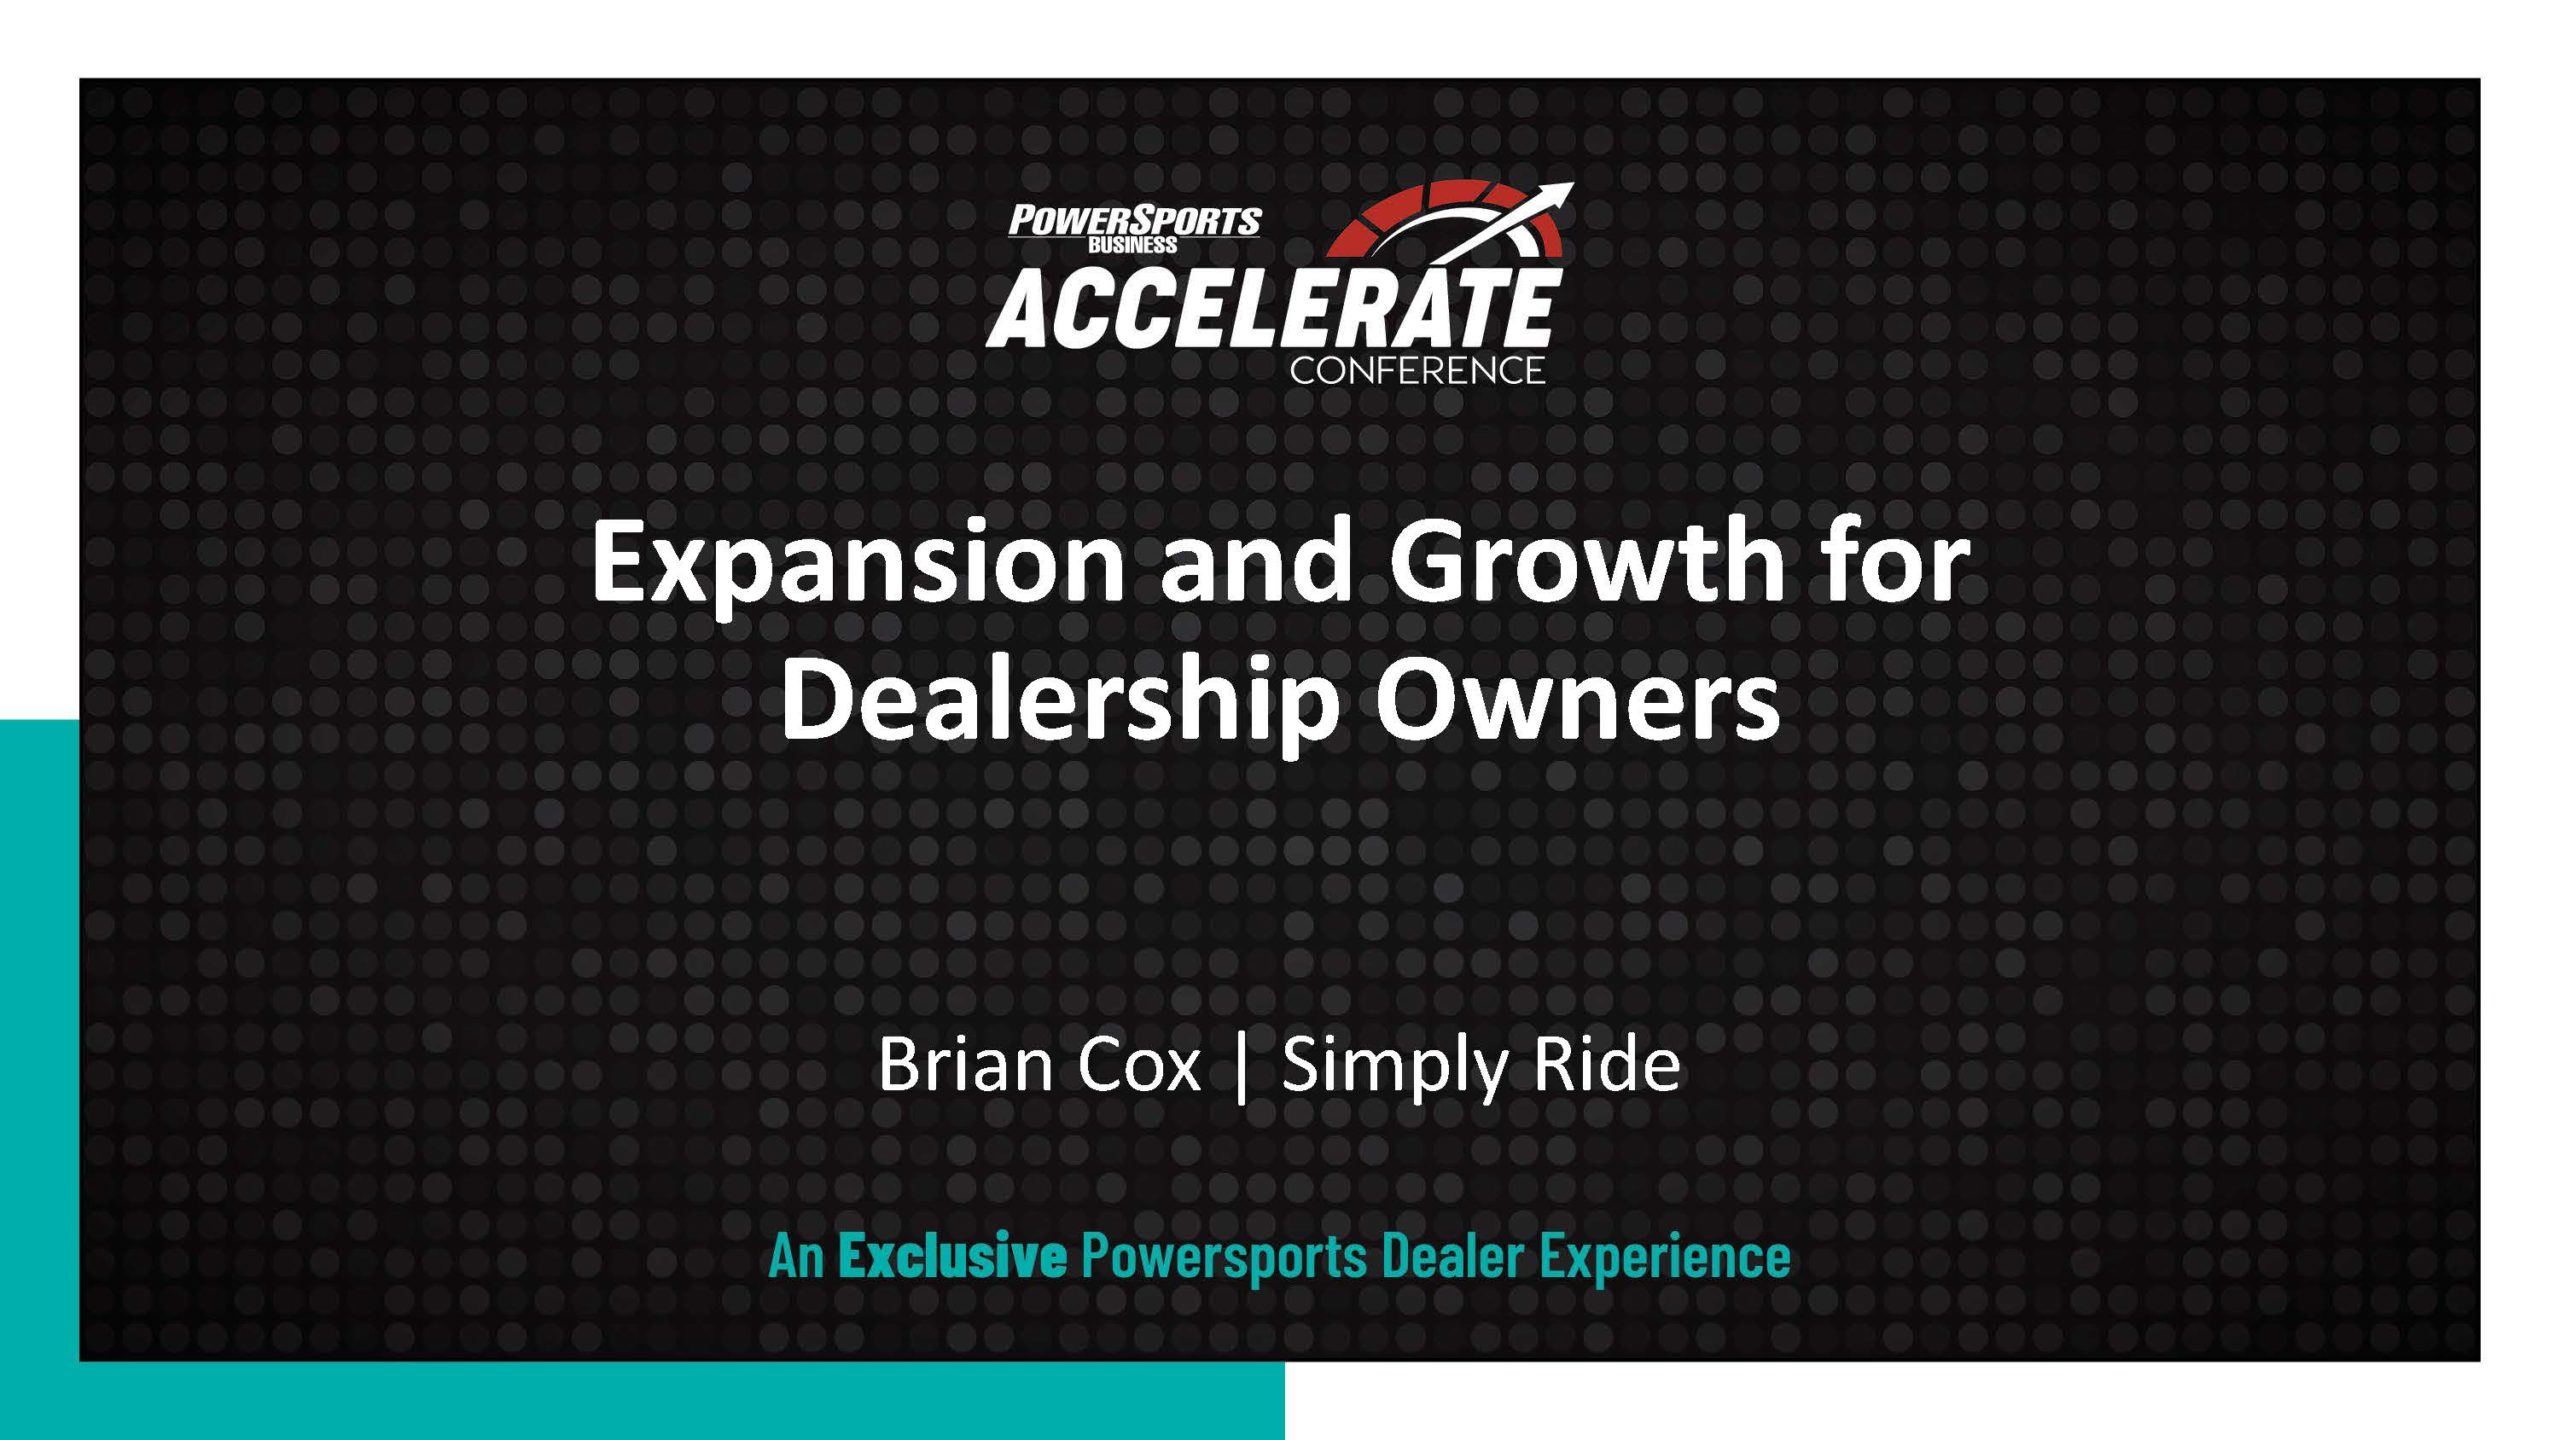 Another Silver-level sponsor joins Accelerate Conference